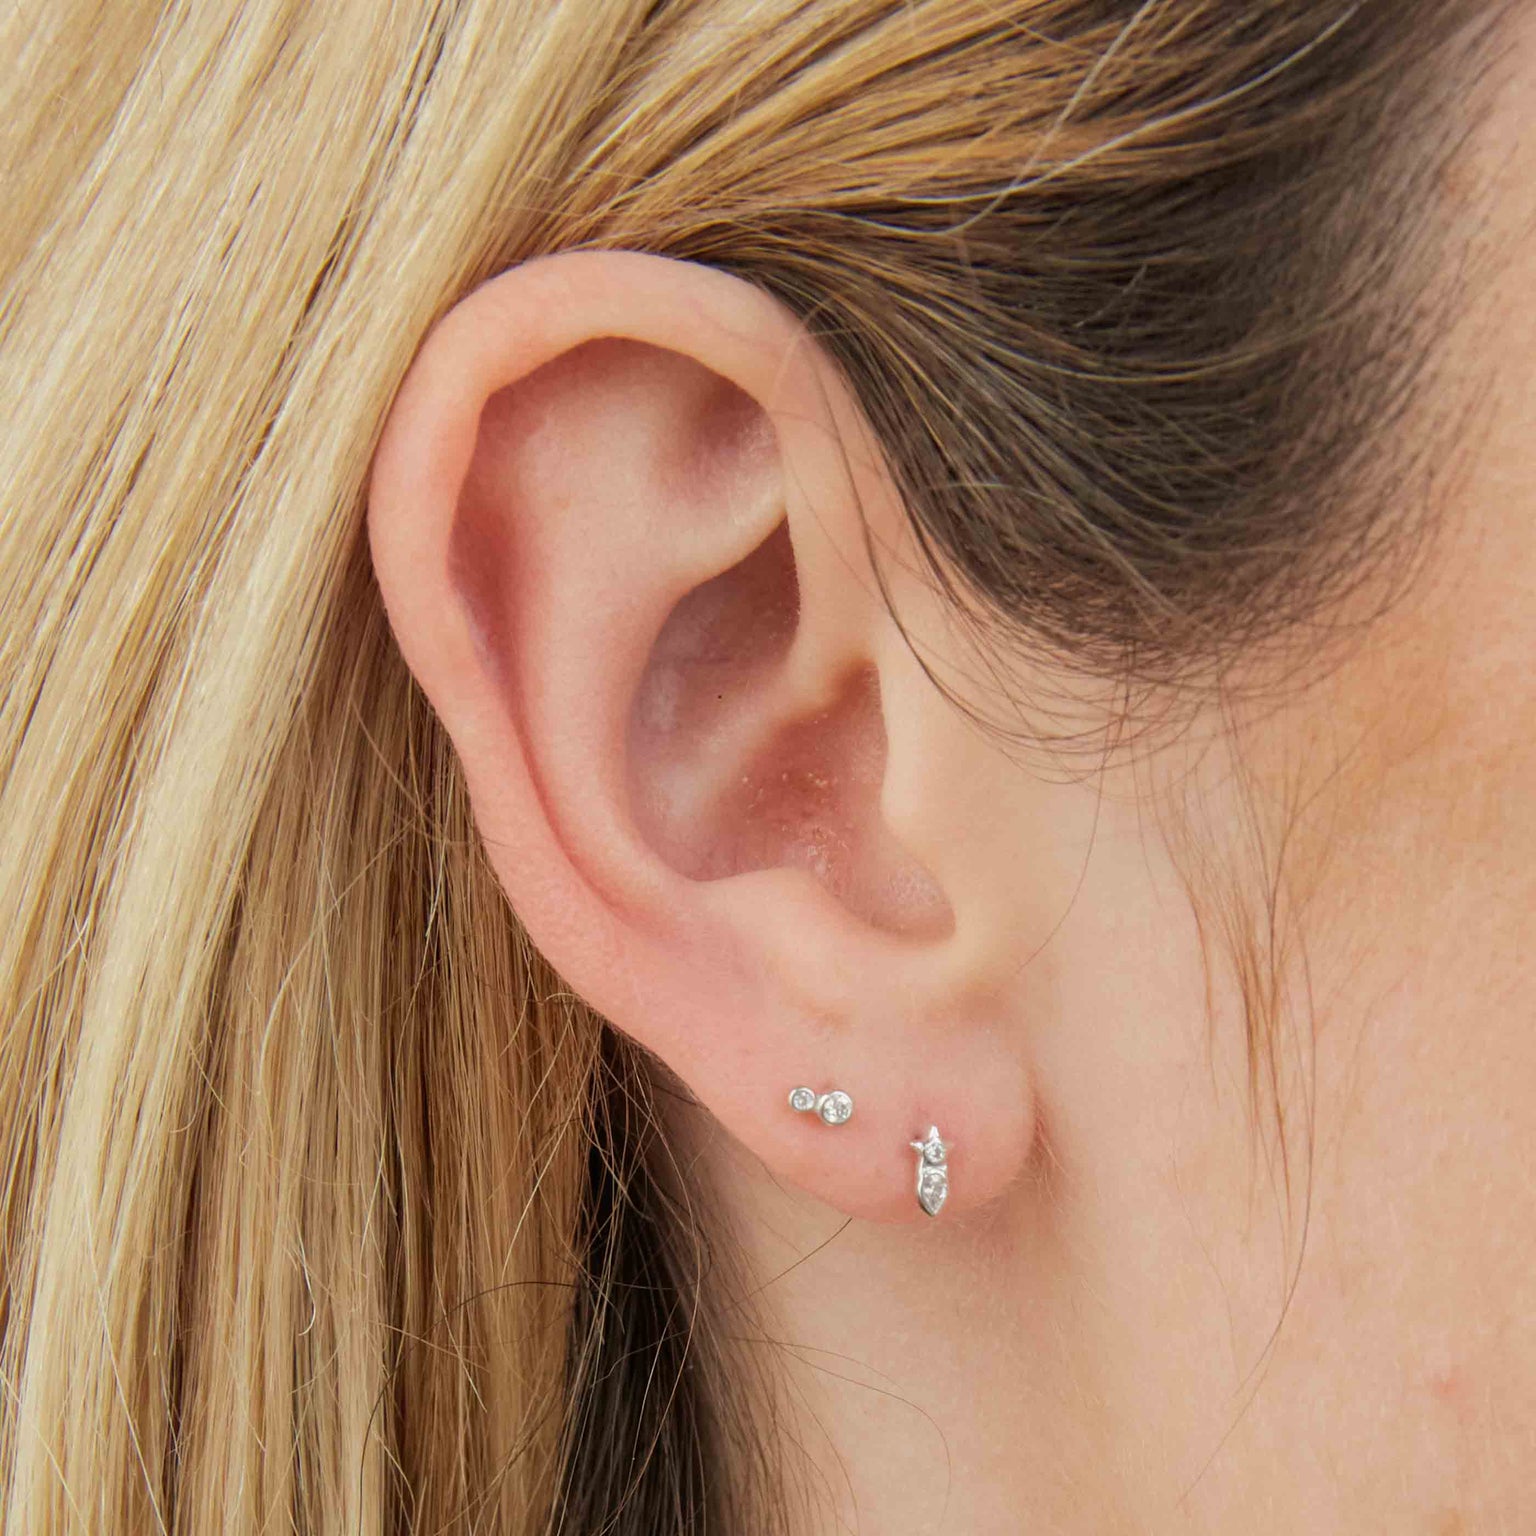 Solid White Gold Double Topaz Piercing Stud